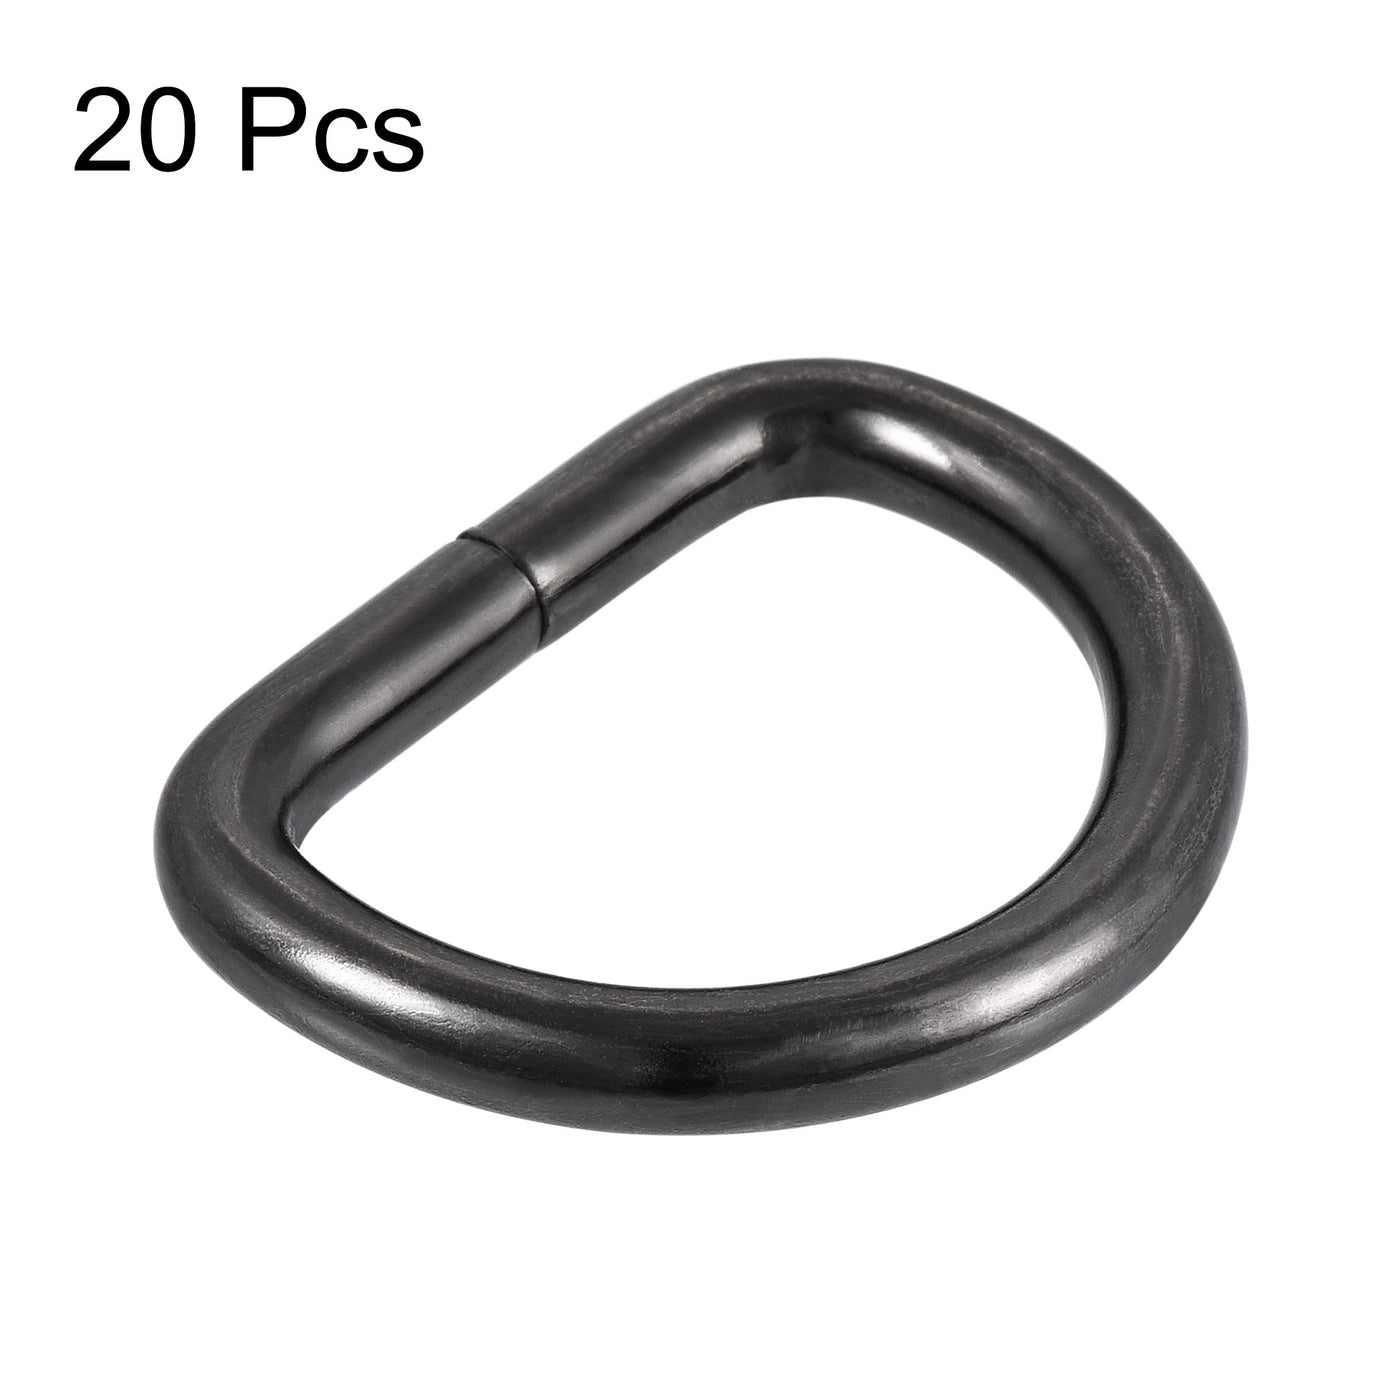 uxcell Uxcell Metal D Ring 0.98"(25mm) D-Rings Buckle for Hardware Bags Belts Craft DIY Accessories Black 20pcs